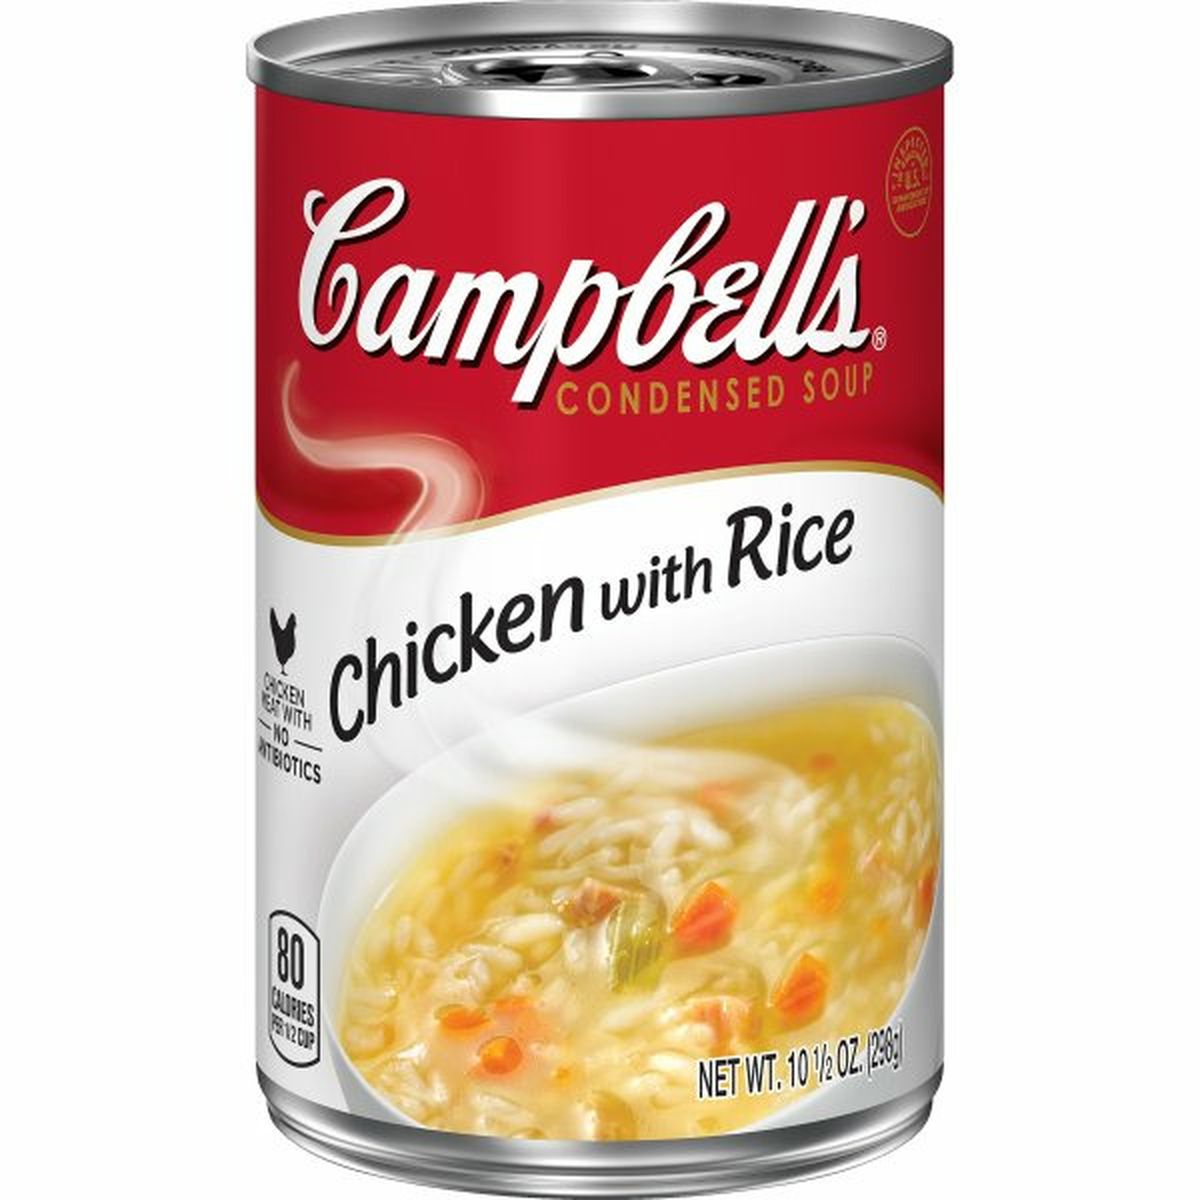 Calories in Campbell'ss Condensed Chicken with Rice Soup